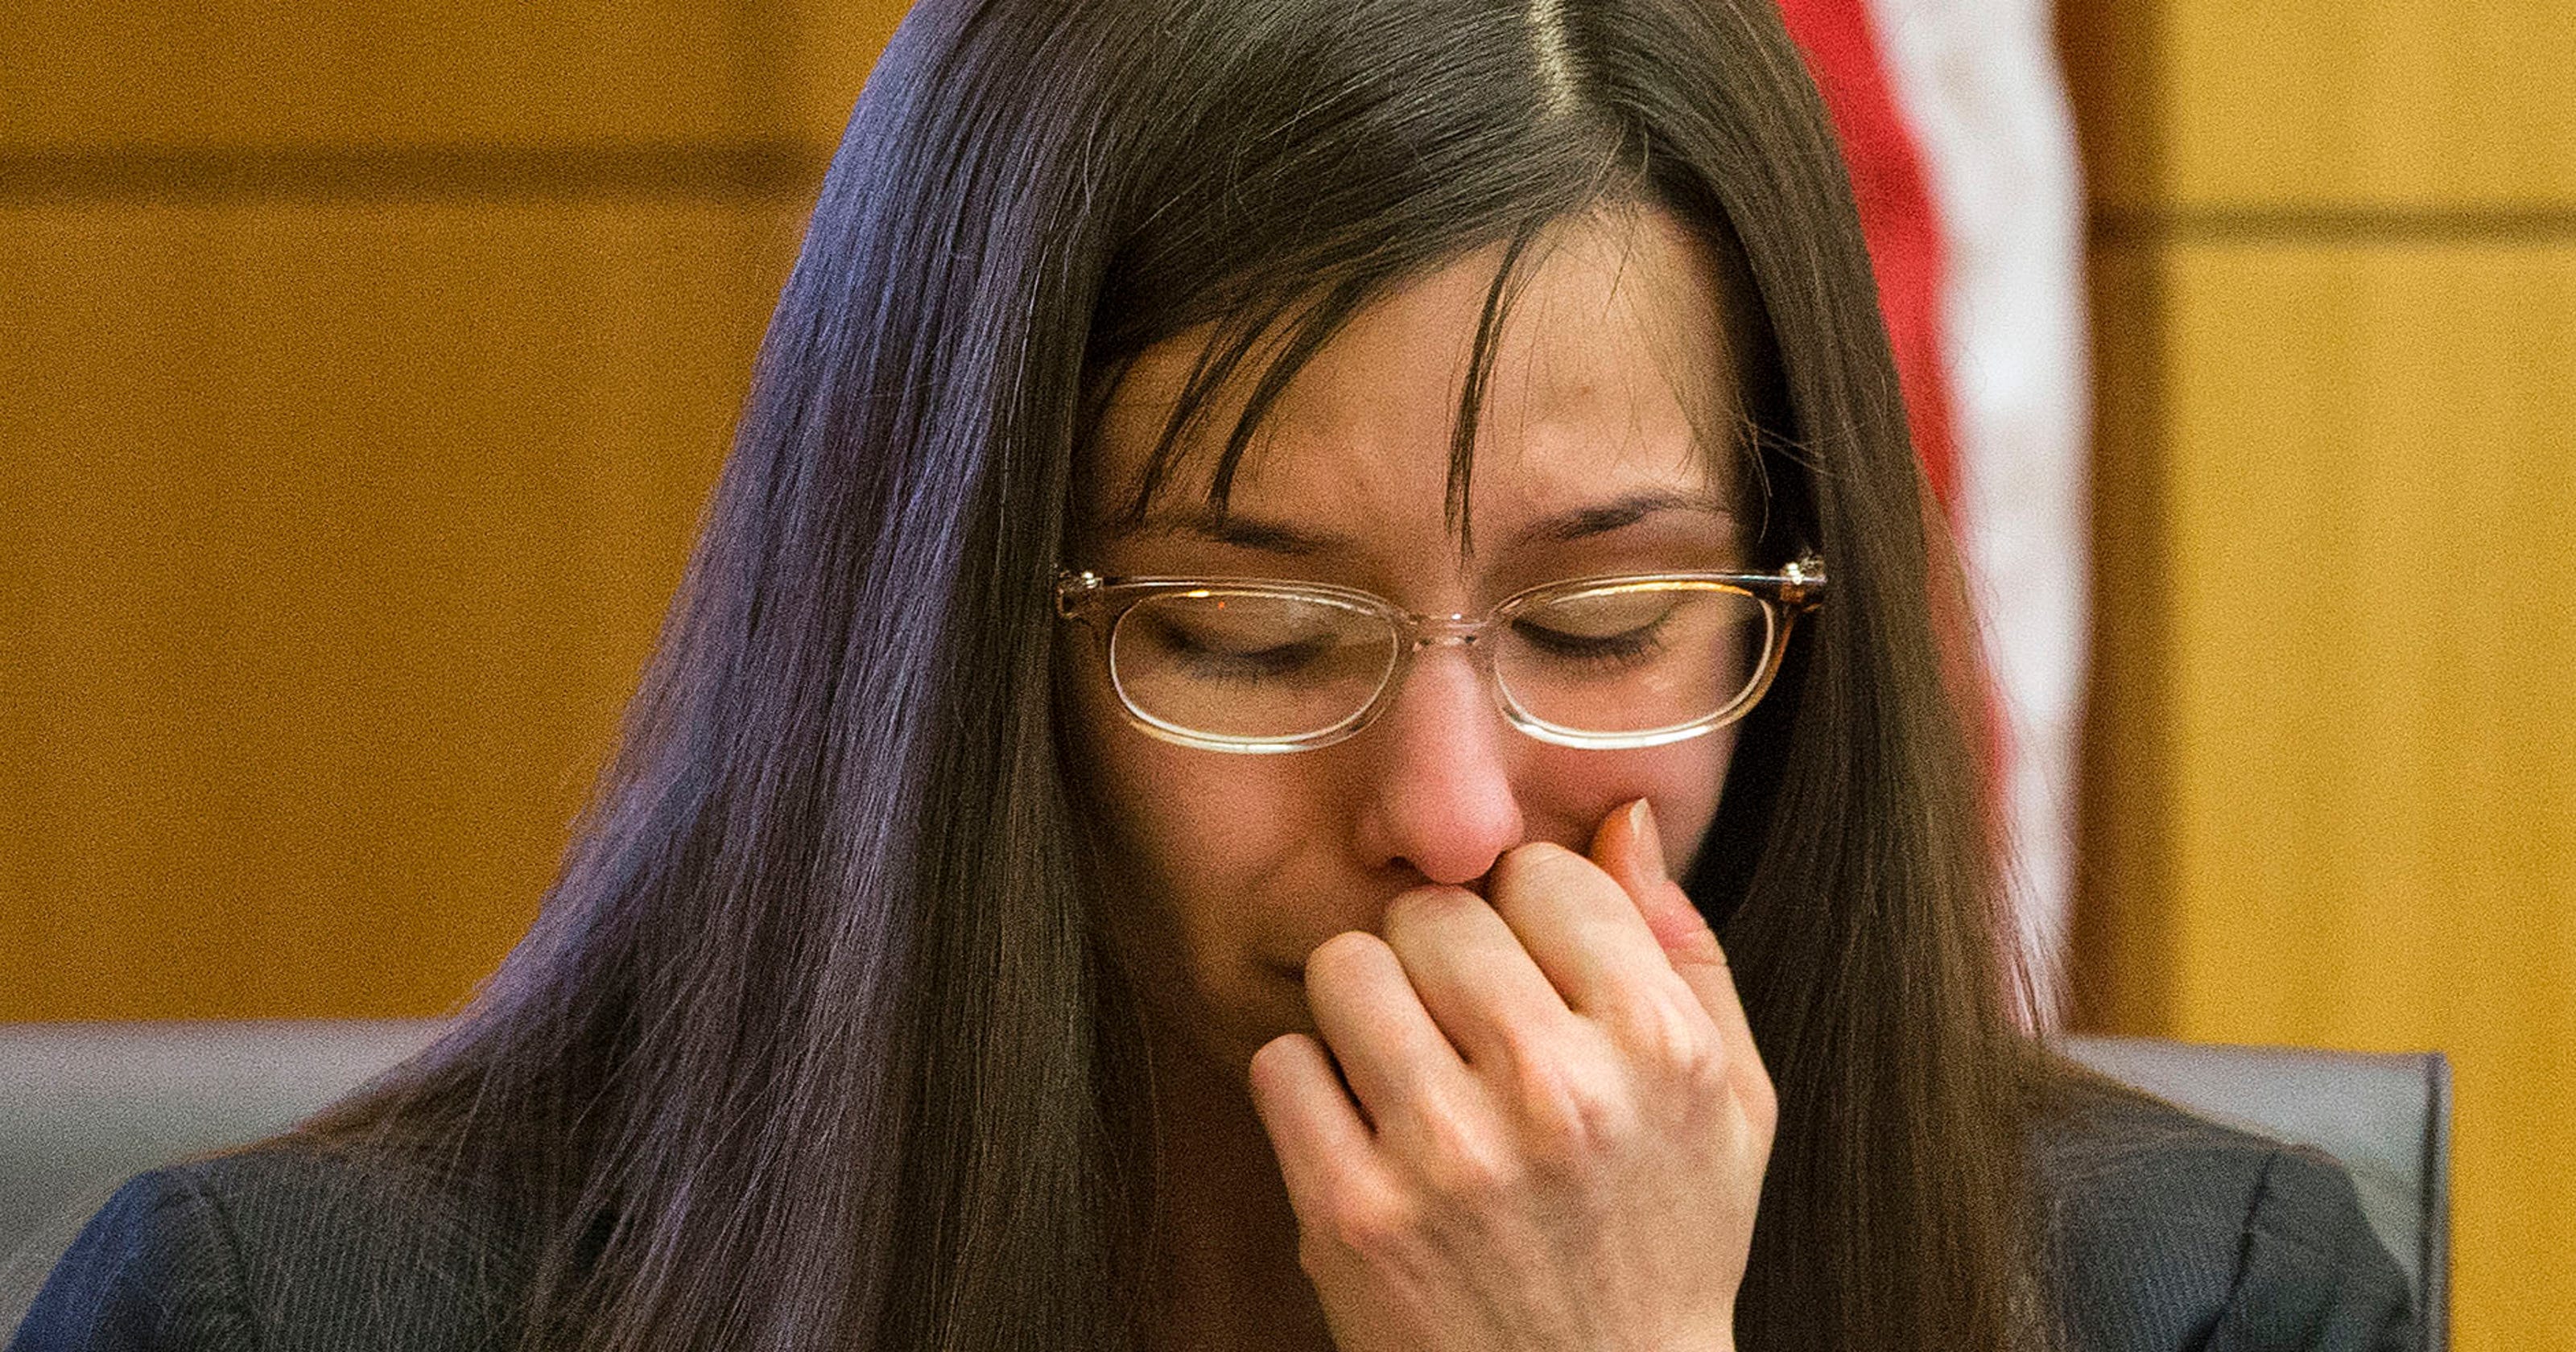 Juror who saved Jodi Arias' life speaks out for first time